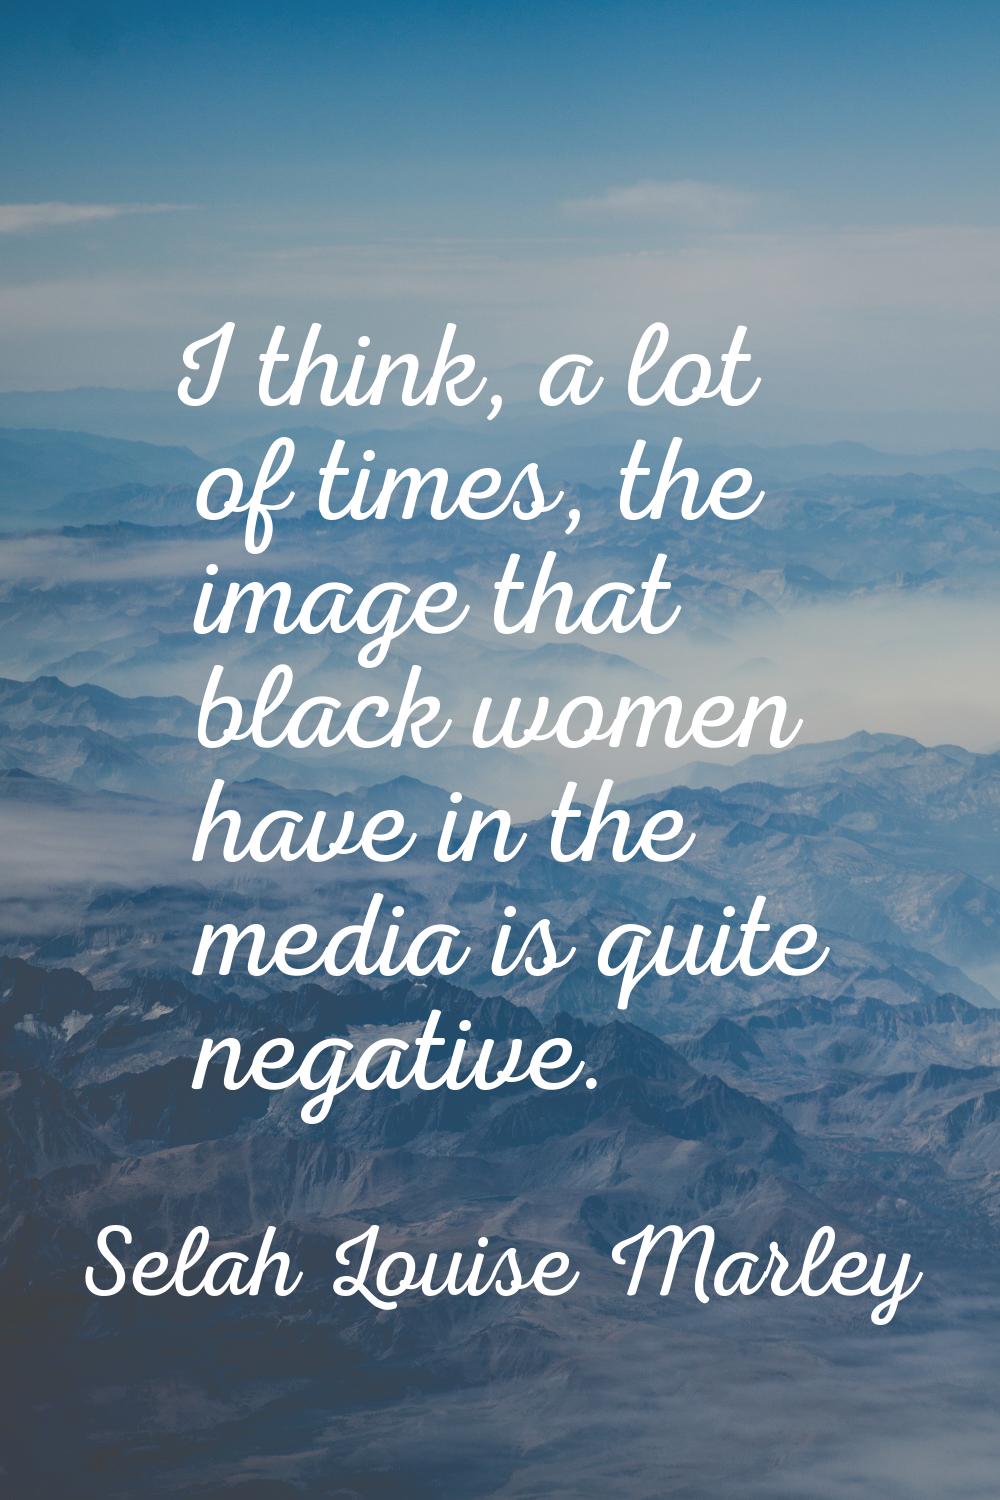 I think, a lot of times, the image that black women have in the media is quite negative.